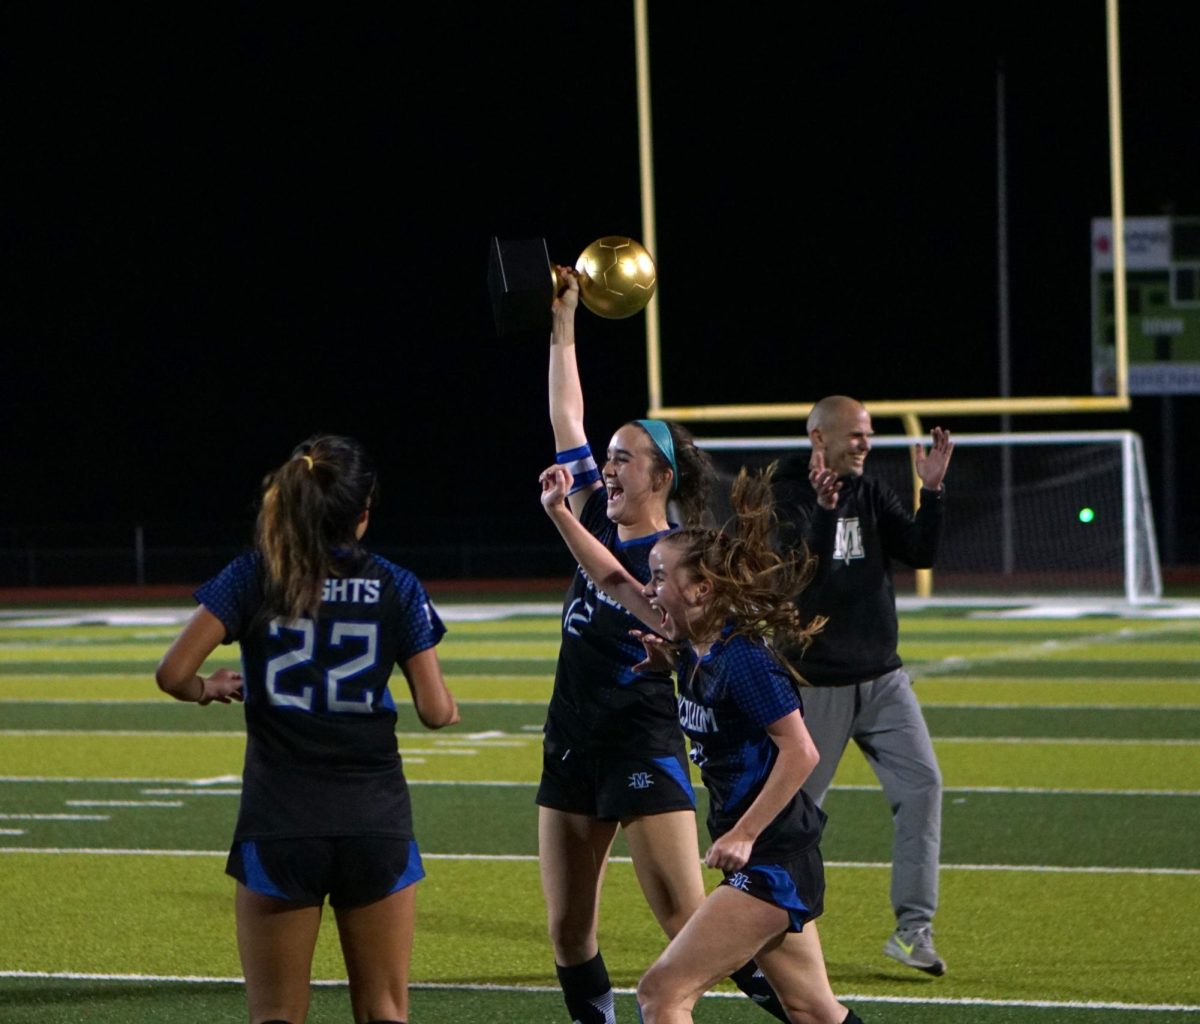 As head coach Thomas Gammerdinger claps for his team, defenders Isa Lopez Reed and Ruby Barnett flank Madi Briggs as she raises the area championship trophy before rushing to her teammates with it. Considering that Lopez Reed, Briggs, Barnett and Sienna Gunning anchored the back line throughout the game, the image seems like an apt symbol for how the game was won.